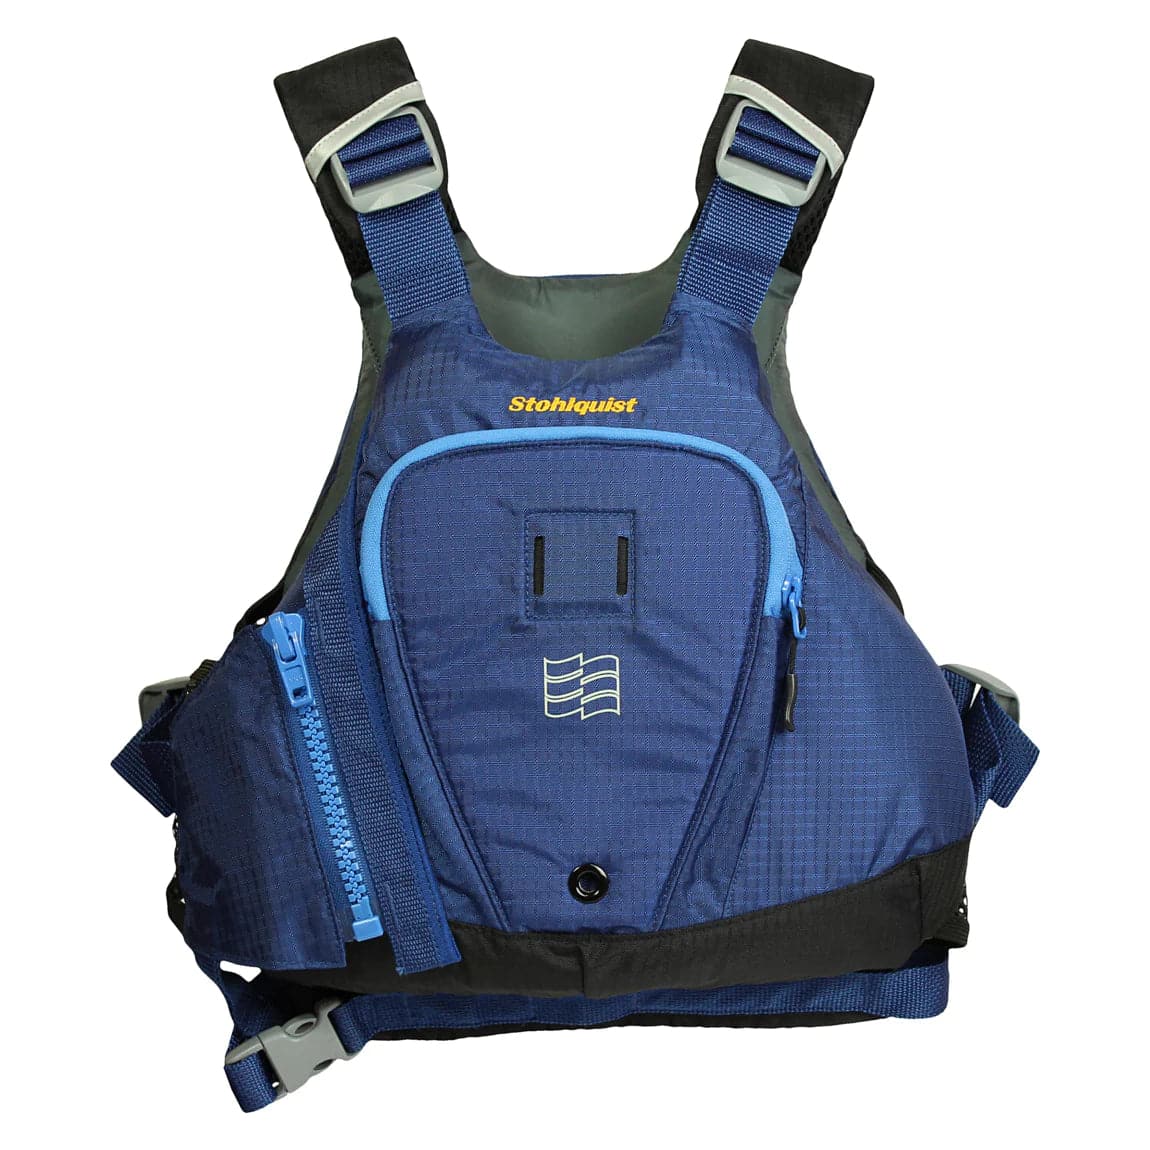 Featuring the Edge PFD men's pfd manufactured by Stohlquist shown here from a third angle.